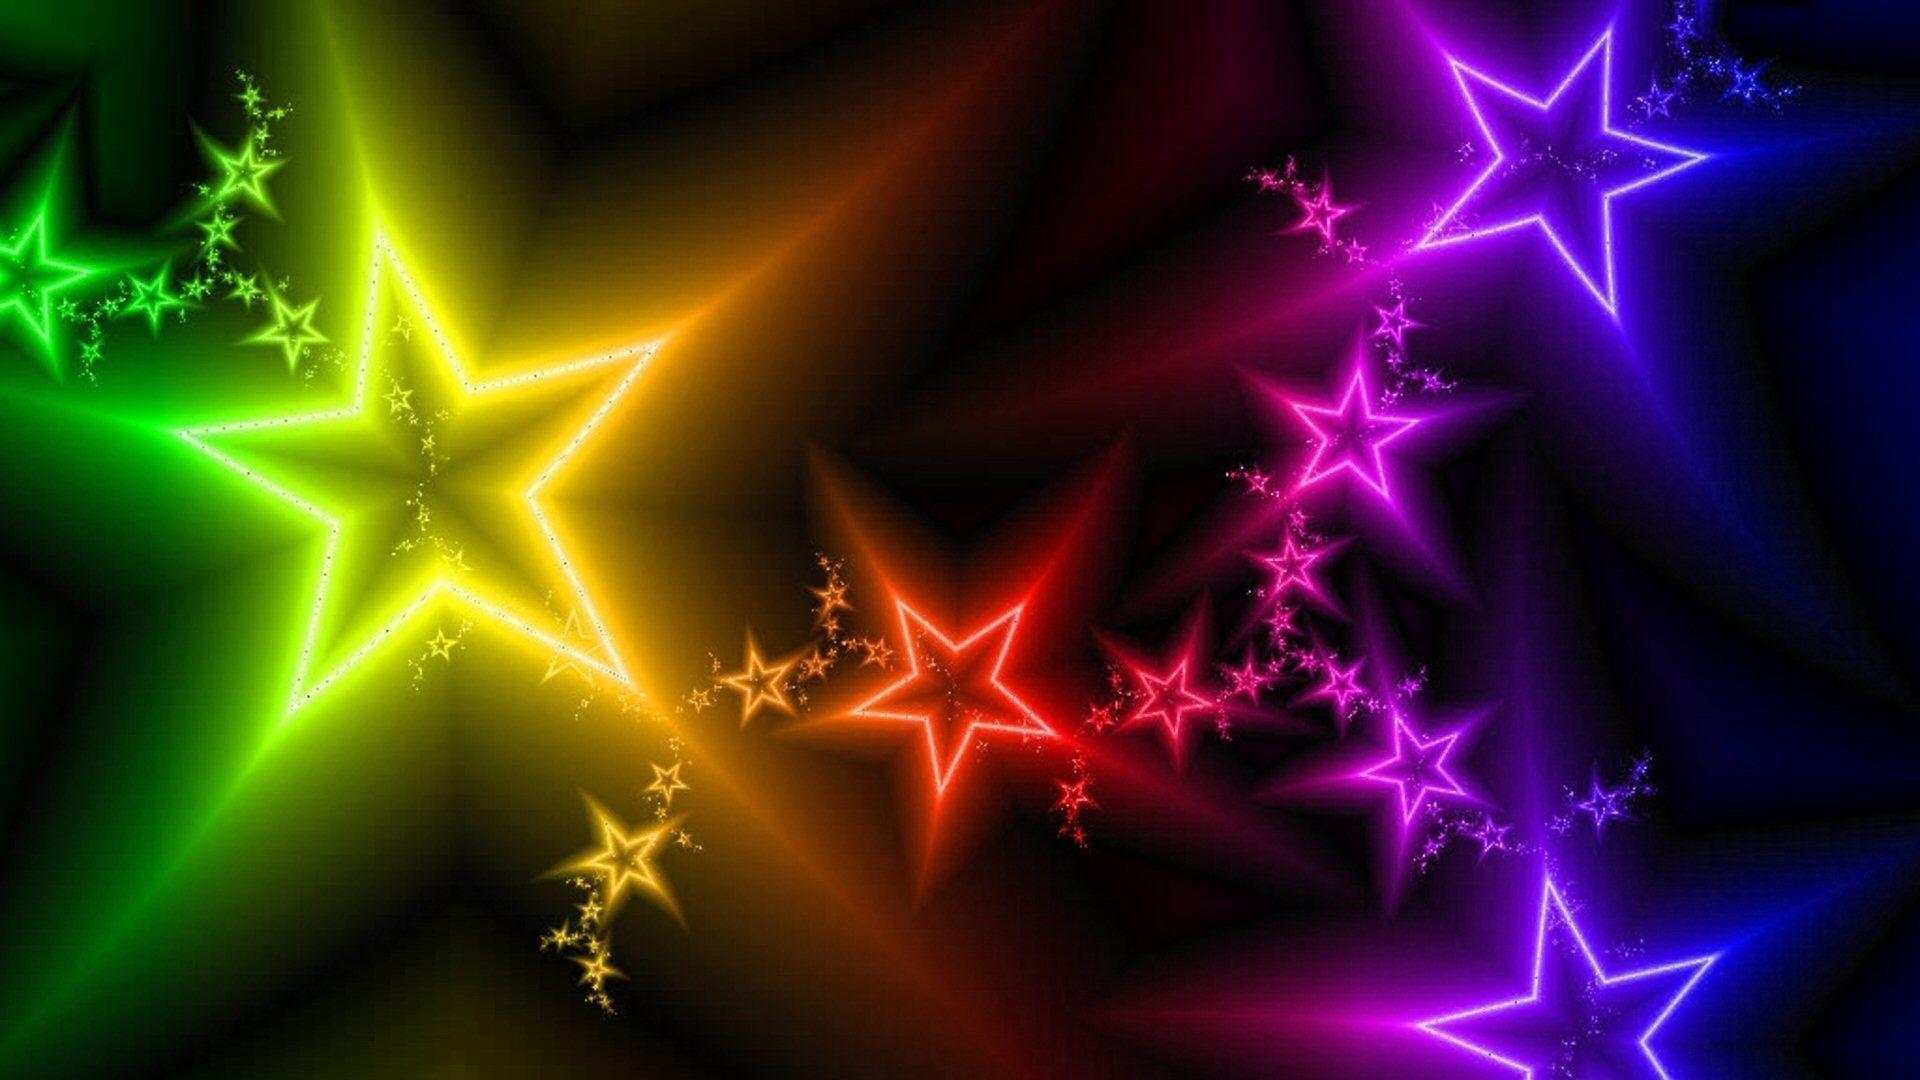 Colorful Star Wallpaper Image 47567 HD Picture. Top Background Free